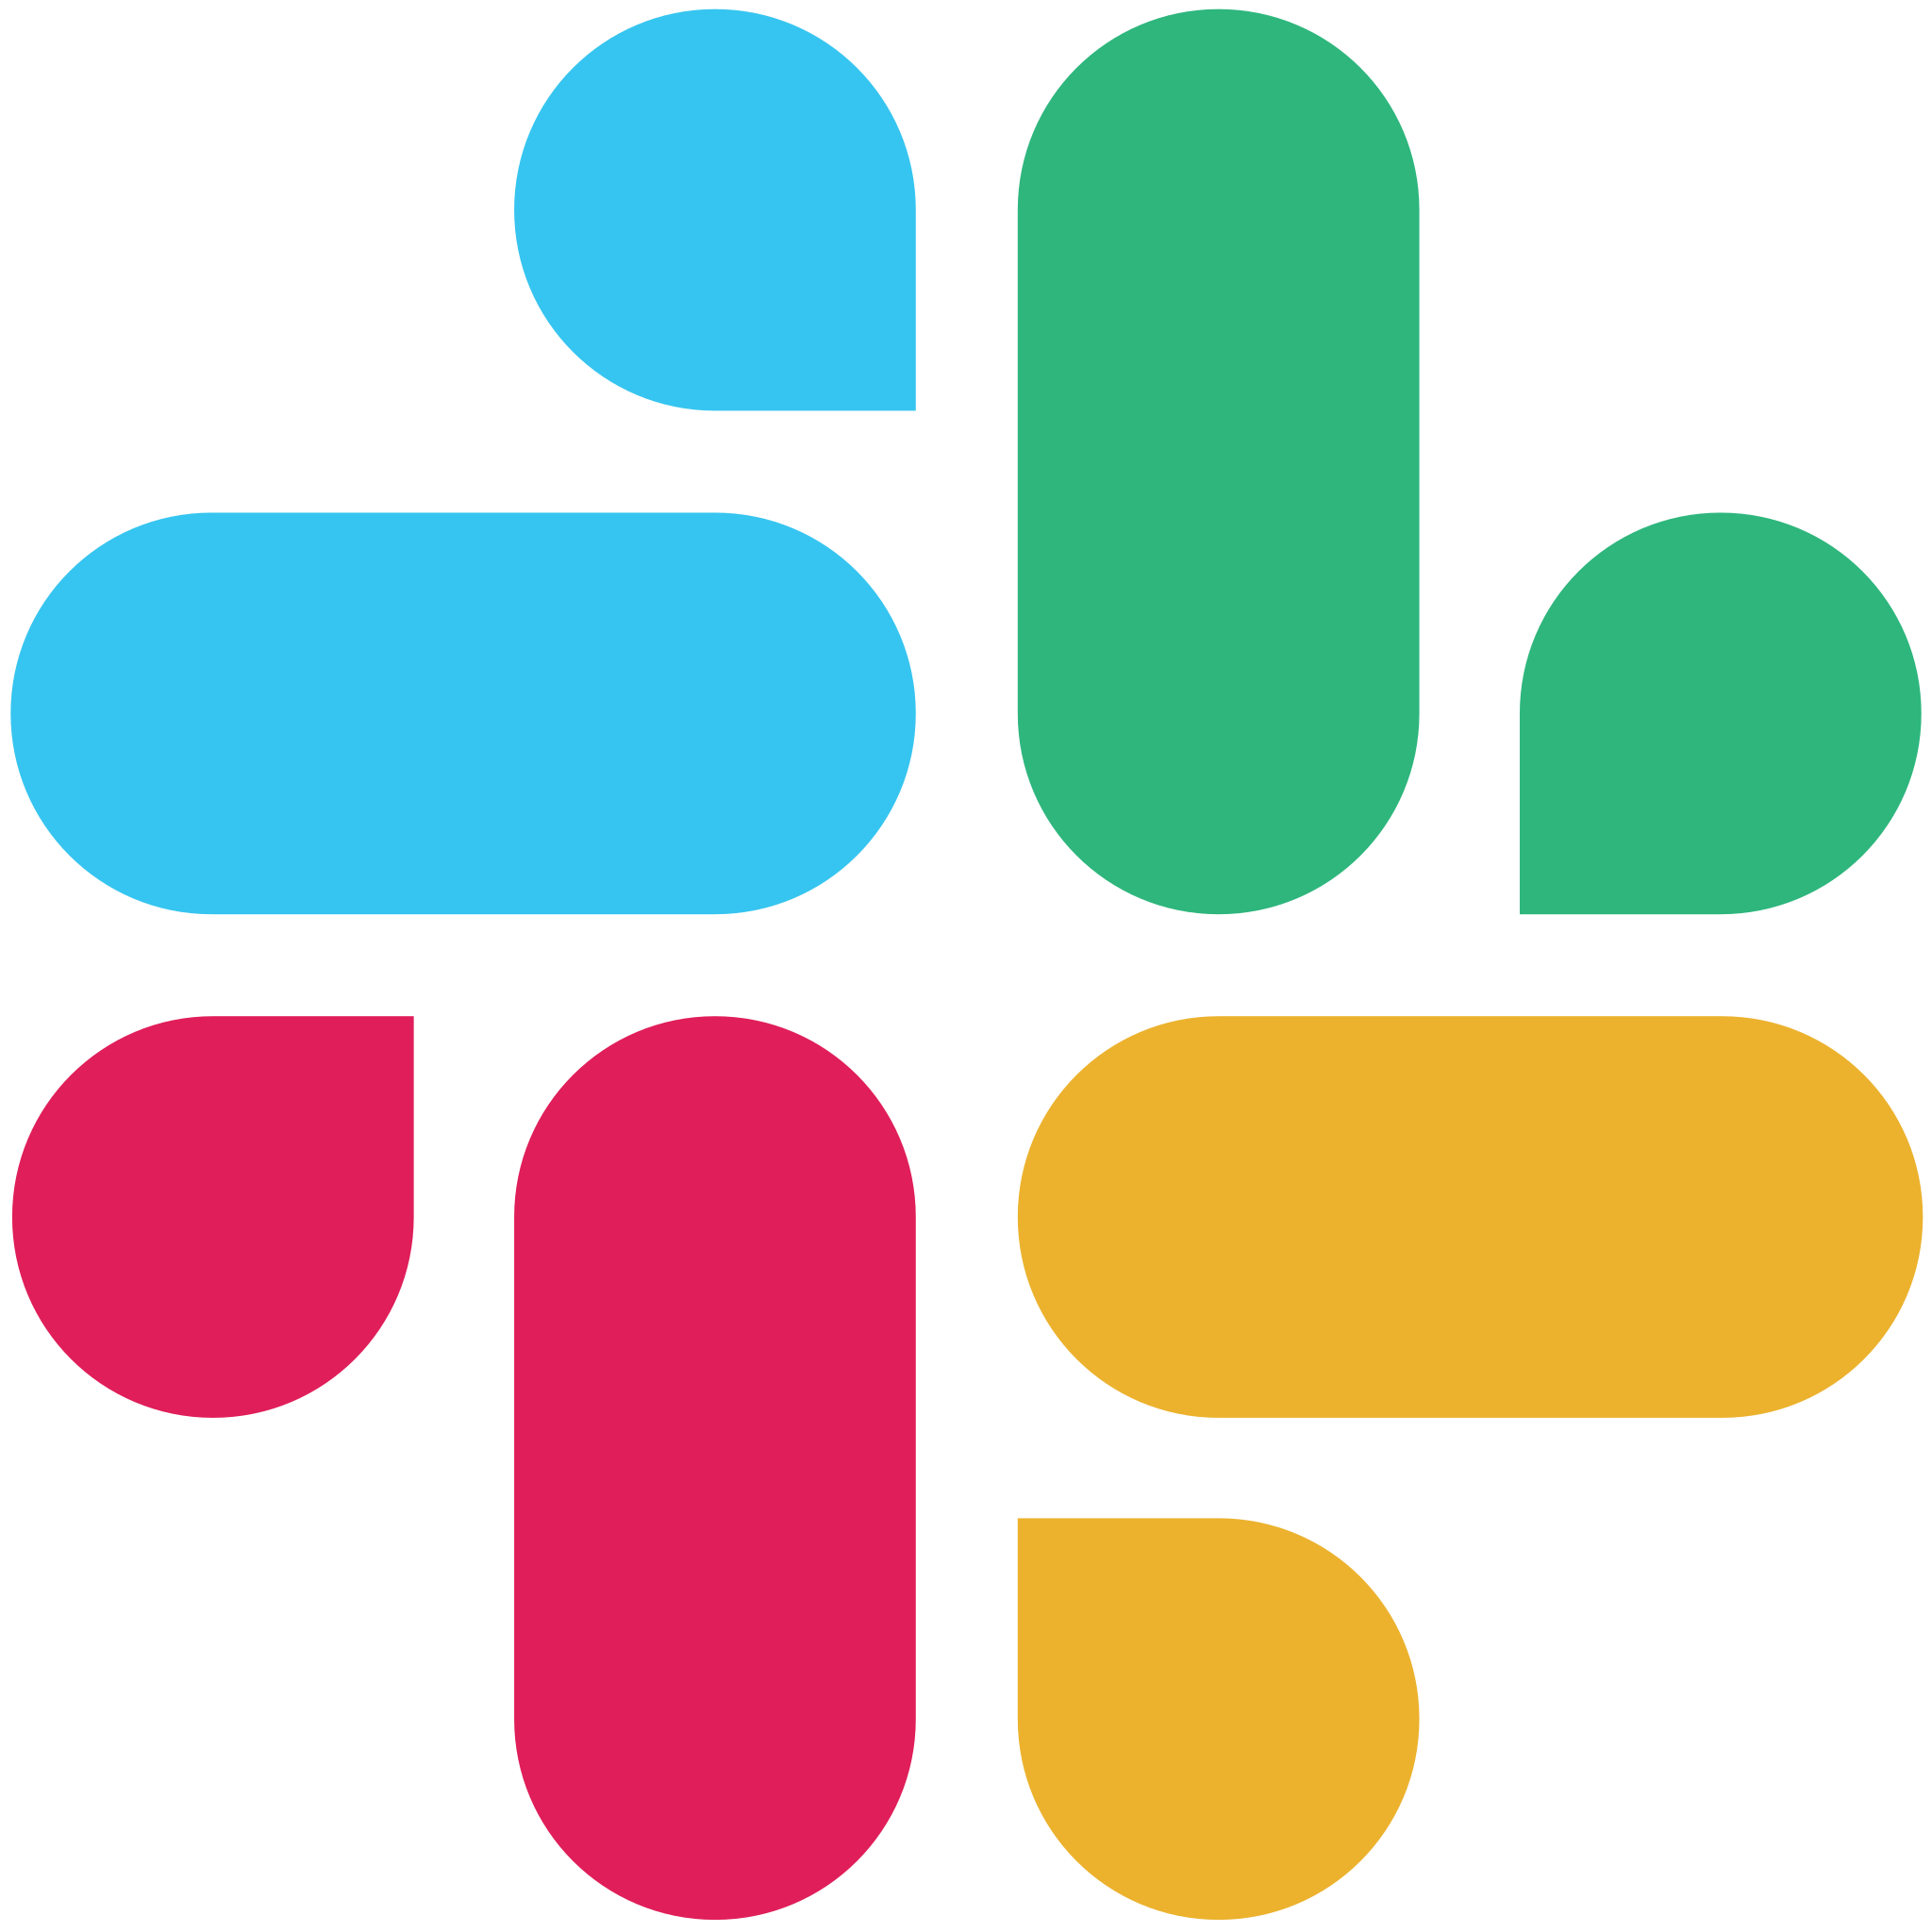 Slack icon - a four-quadrant vector graphic that resembles a plus sign. Each of the four quadrants contains two elements that feature soft, curvilinear features. Each quadrant is tagged in a different color: red, blue, green, and yellow.